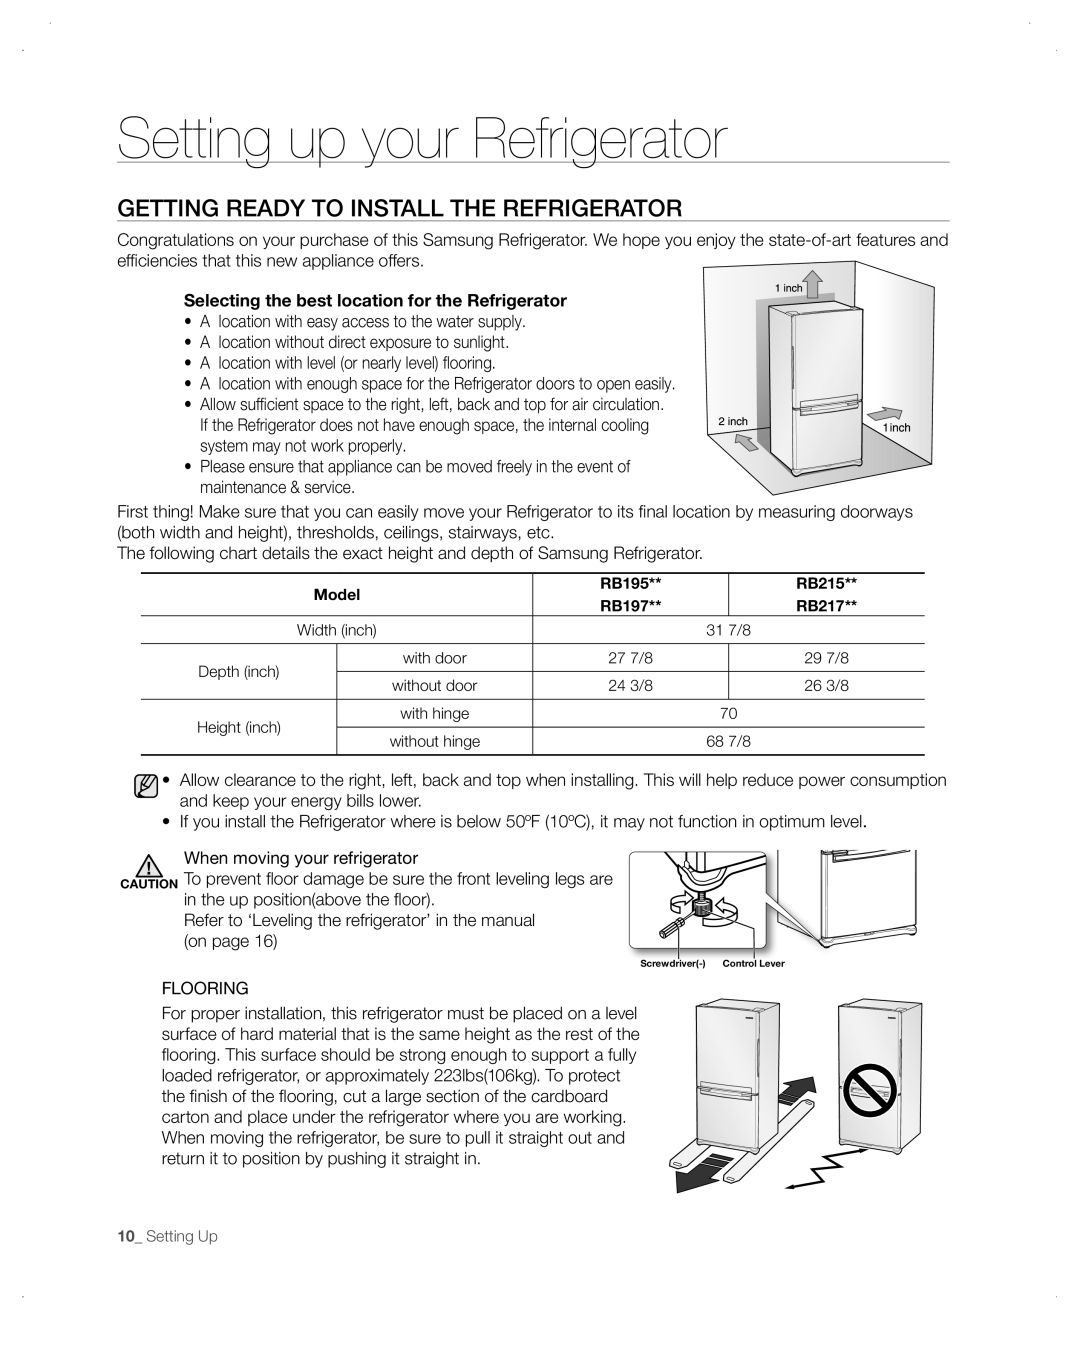 Samsung RB195, RB197, RB215ACPN, RB215ACBP, RB217 Setting up your Refrigerator, GEttinG READy to instALL tHE REFRiGERAtoR 